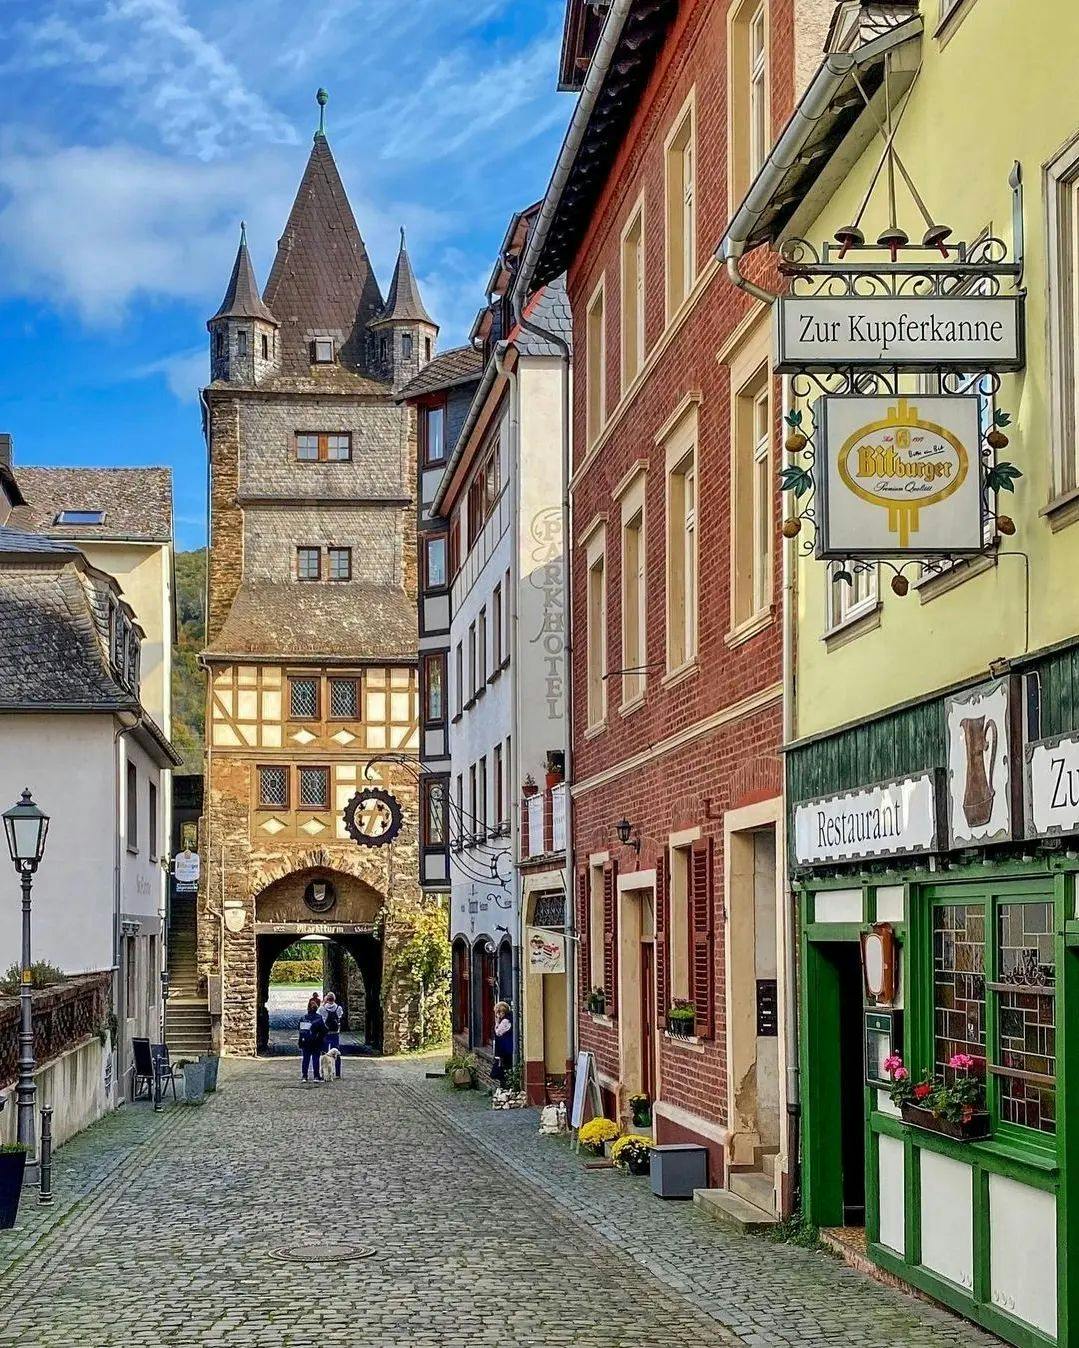 <p>Marktturm, or Market Tower, is a term that can refer to different historical towers in Germany.</p><p><br></p><p>Here are some examples:</p><p><br></p><p><strong>Marktturm Luckenwalde</strong></p><p>This is a free-standing tower that was originally built as a toll tower in the 13th century. It was later extended with cloister-format tiles and used as the bell tower of the St. Johanniskirche church. It has a distinctive Baroque cap and offers a panoramic view of the town and the surrounding area. It can be visited as part of tours organized by the local history museum.</p><p><br></p><p><strong>Marktturm Bacharach</strong></p><p>This is a preserved tower on the Rhine side of the town wall that dates back to the 15th century. It was the site of the annual Bacharach wine market until the 18th century. It also served as a detention centre, a municipal bell, and a wine tavern at different times. It was restored by the Rhineland Association for the Preservation of Monuments and Landscape Protection in 1910 and added roof corner towers. It is now a private residence.</p><p><br></p><p><strong>Marktturm Esslingen</strong></p><p>This is a Gothic tower that was built in the 15th century as part of the town hall complex. It has a height of 43 meters and a clock face on each side. It also has a carillon that plays melodies every hour. It is a landmark of the town and a popular tourist attraction.</p><p><br></p><p>There are other market towers in Germany, such as Marktturm Wernigerode, Marktturm Halle, and Marktturm Leipzig. They are all examples of the architectural and historical heritage of the country. 🇩🇪</p>